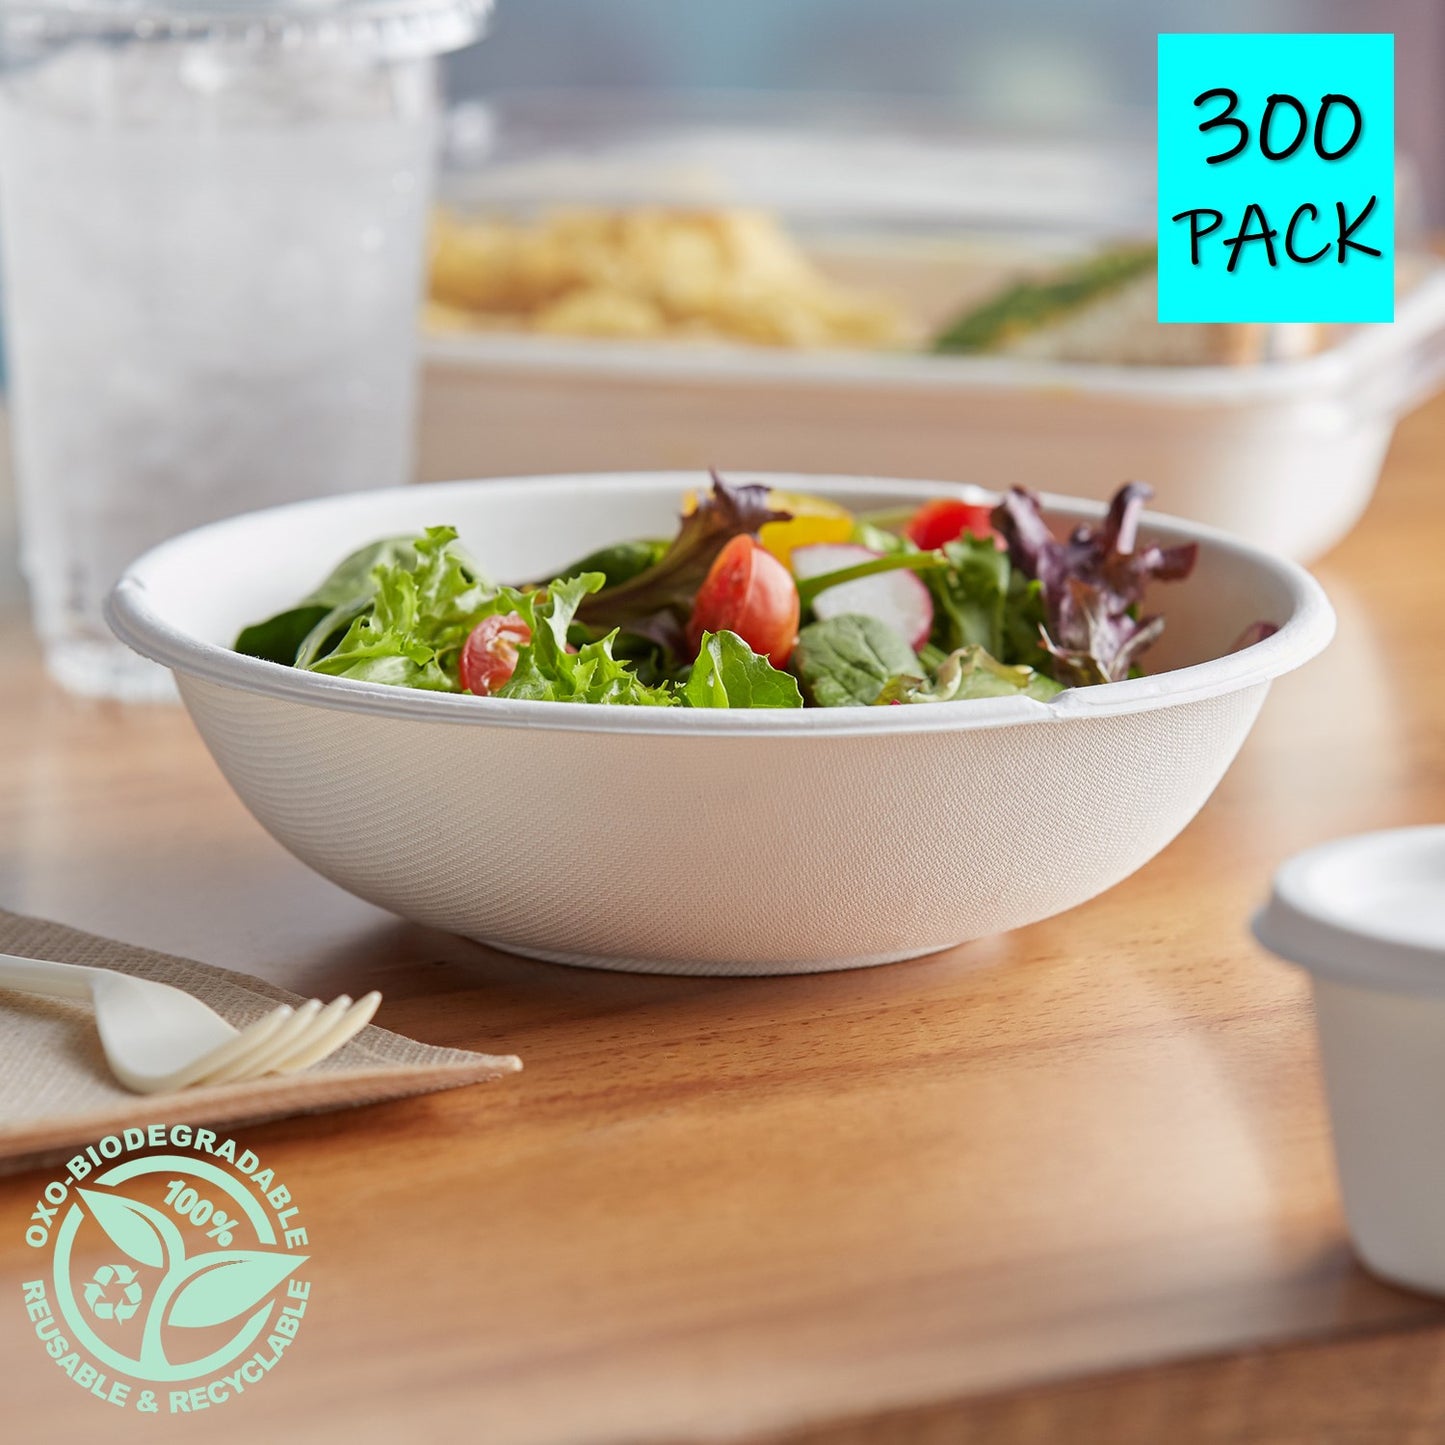 Take-Out Container Round Bowl 8" 32oz 1 Compartment Eco-Friendly Natural 300 Pack